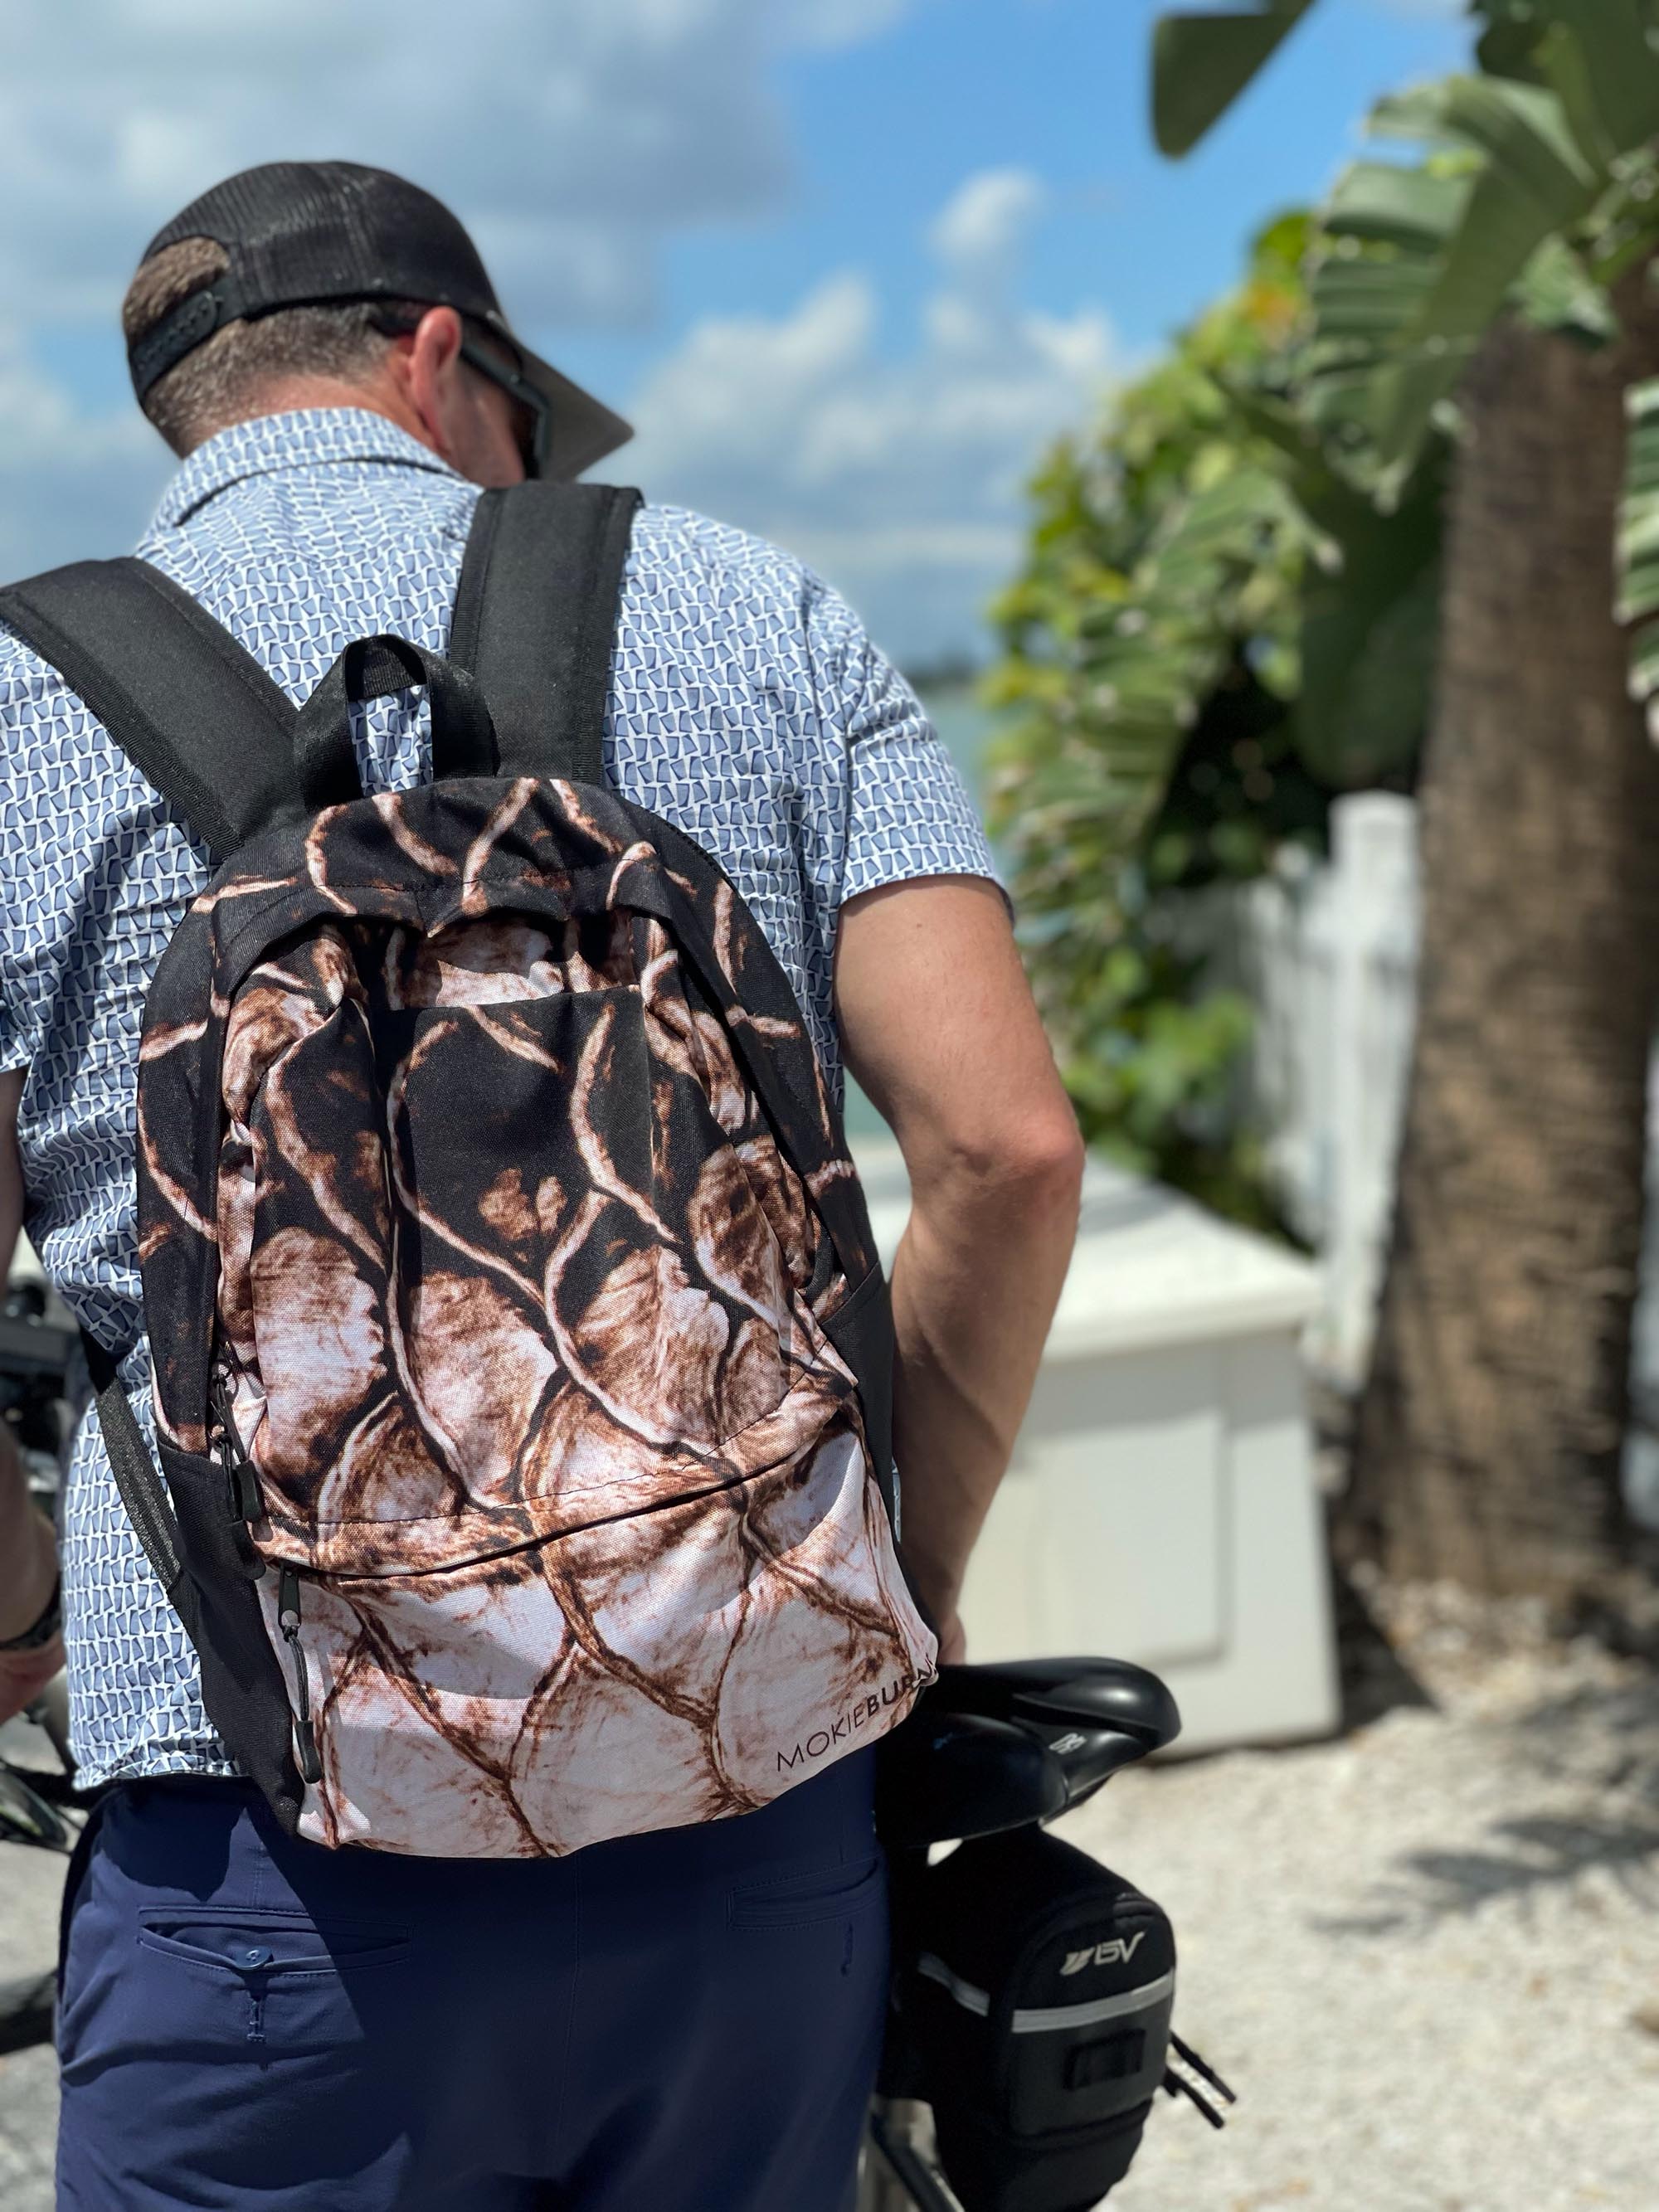 Tarpon Scales Inshore Fishing water resistant outdoor activity backpack, a great back to school gift for fishing kids everywhere! Saltwater inshore Florida fishing wood burned art by Mokie Burns